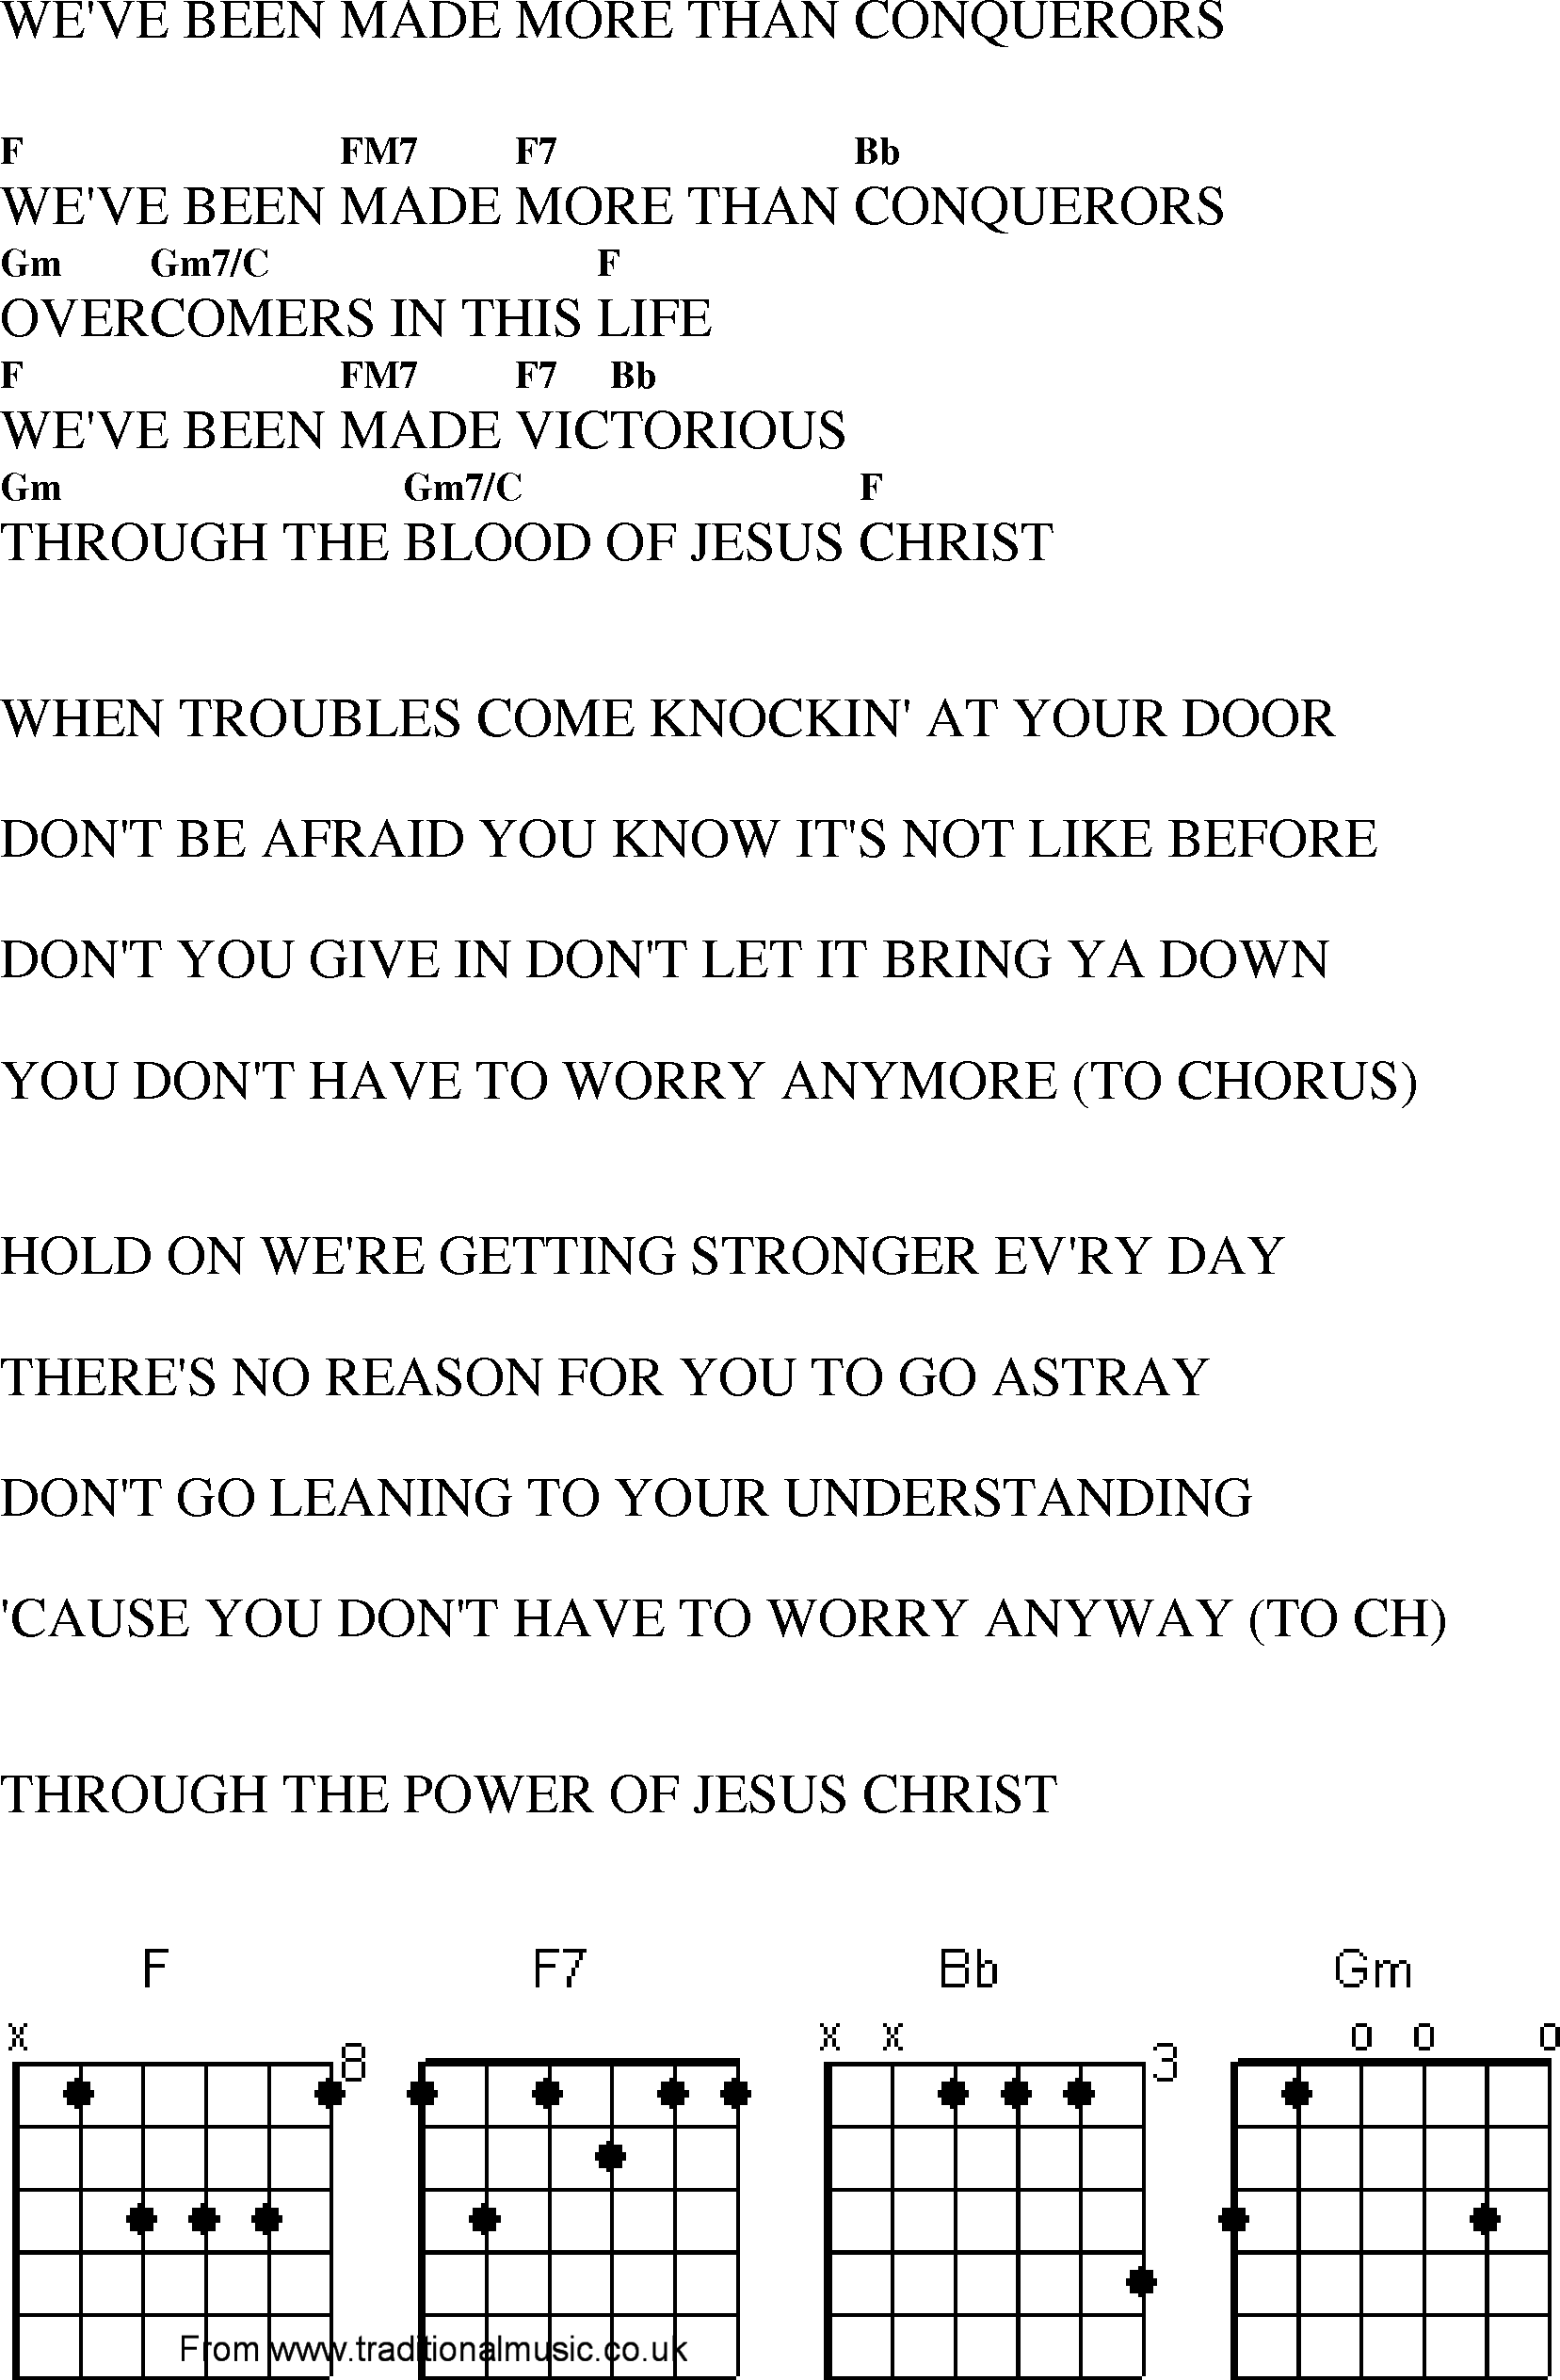 Gospel Song: weve_been_made_more_than_conquerors, lyrics and chords.